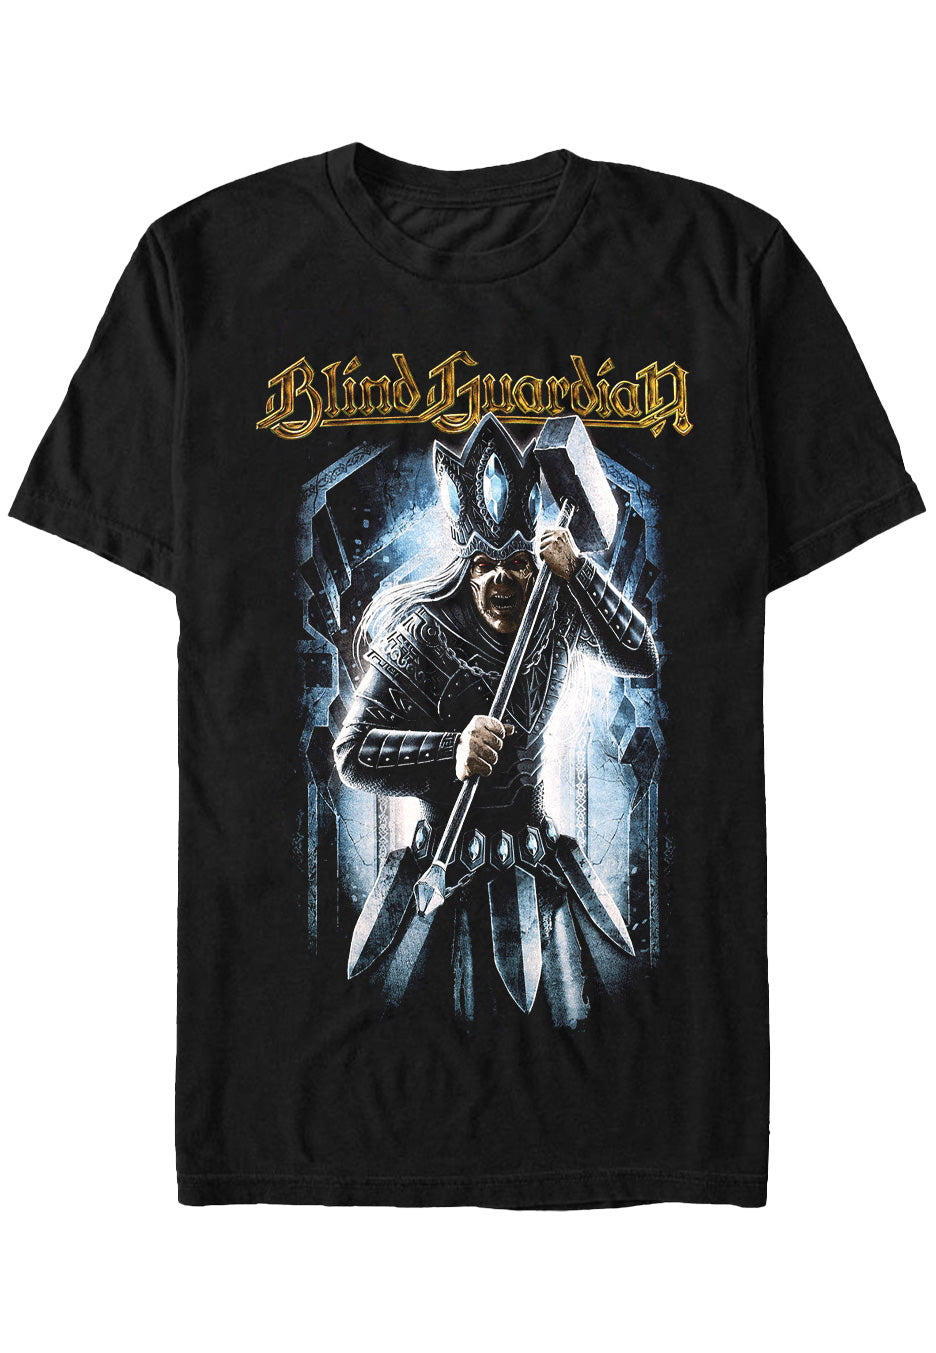 Blind Guardian - The Iron Crowned - T-Shirt